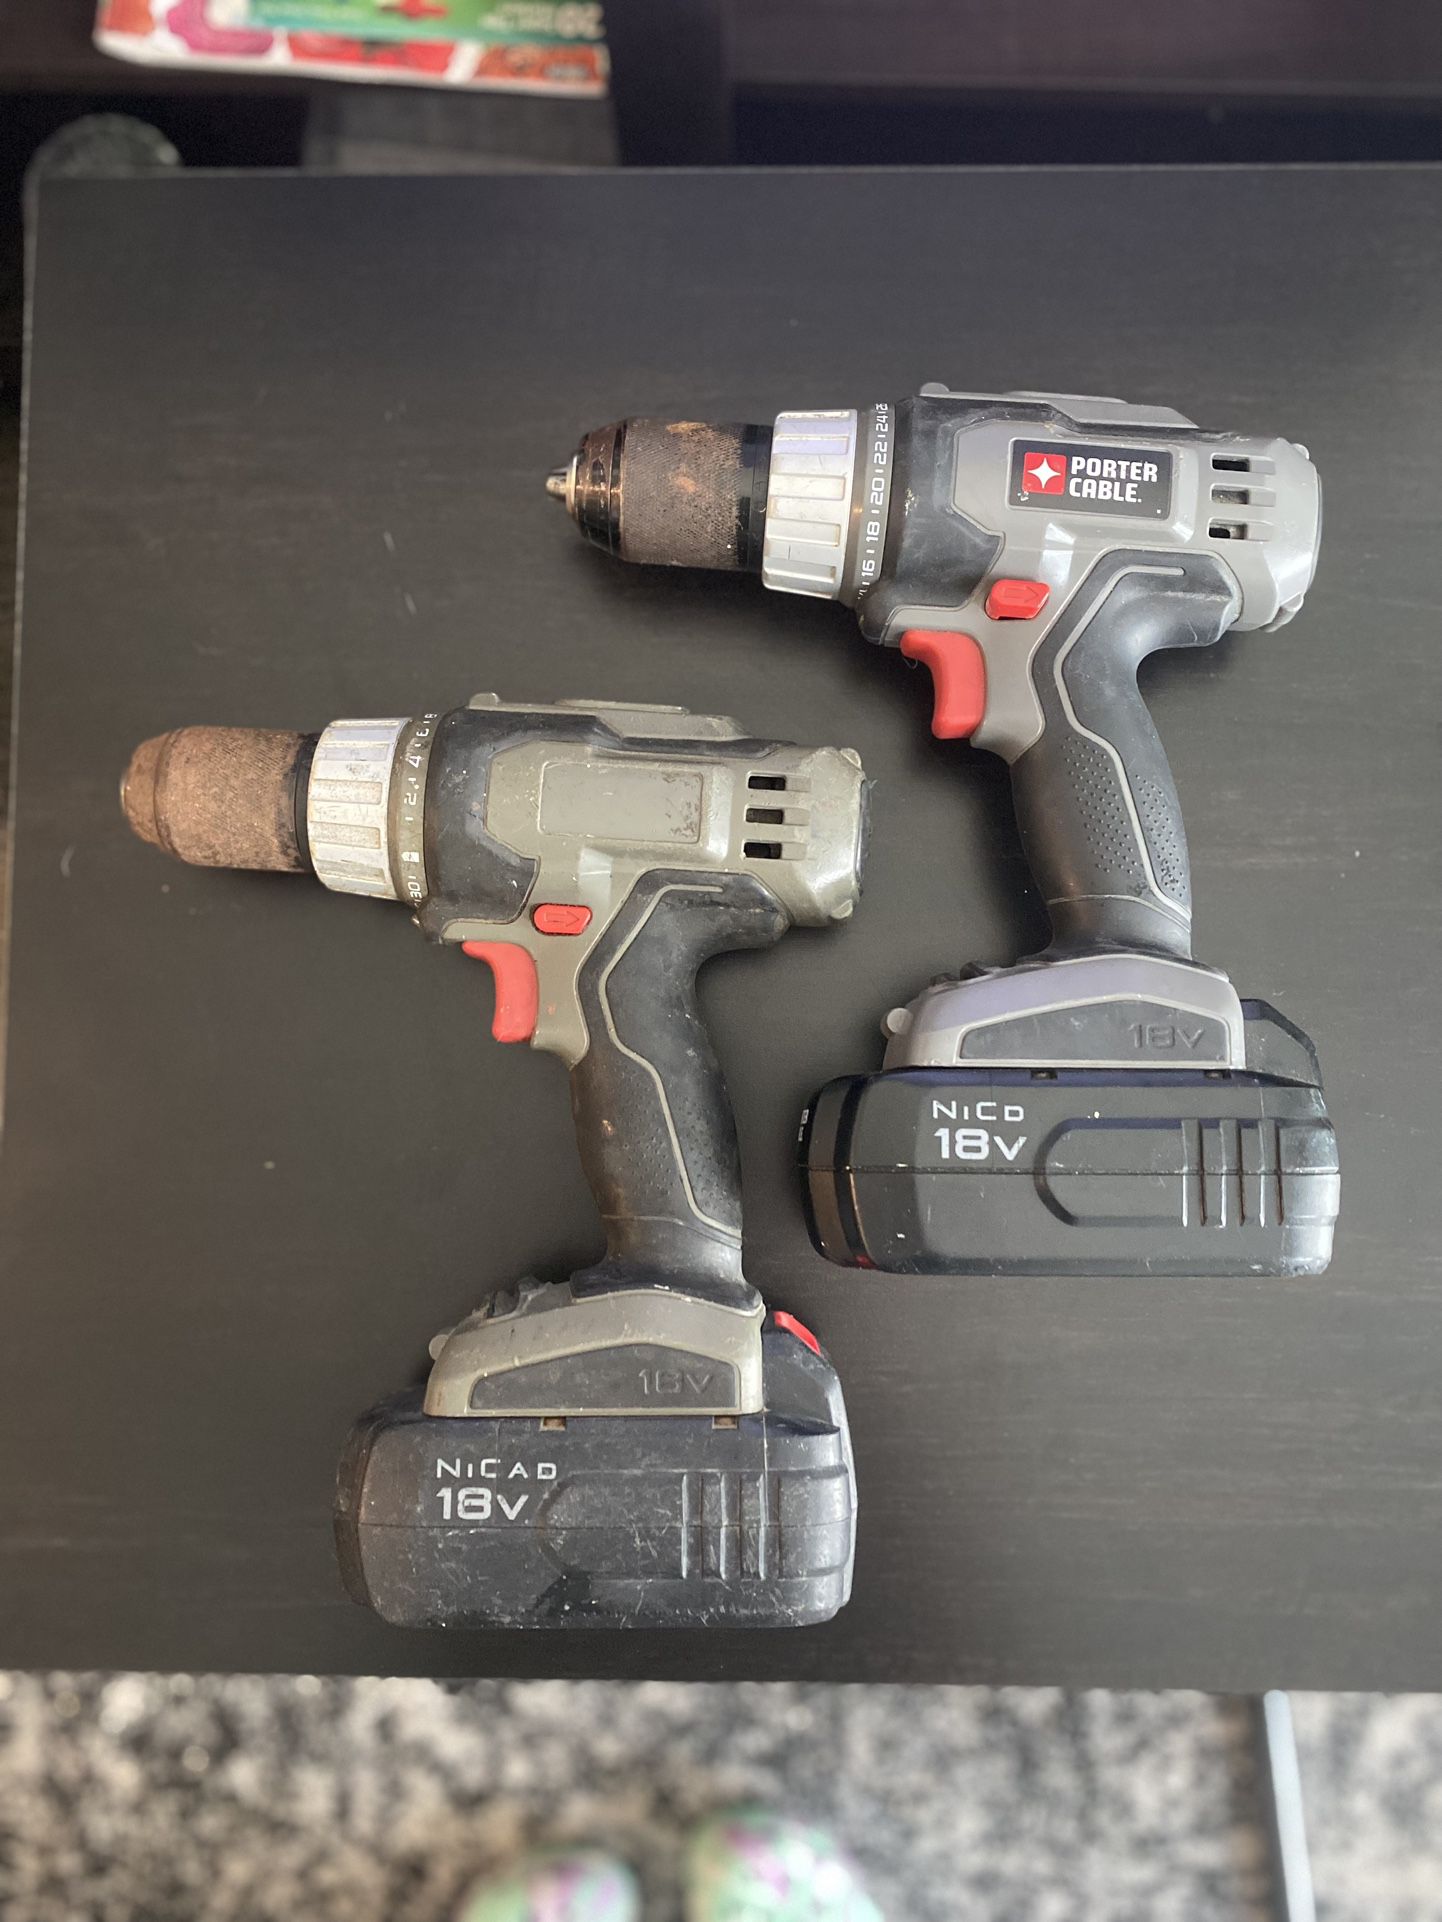 18V Porter Cable power drills